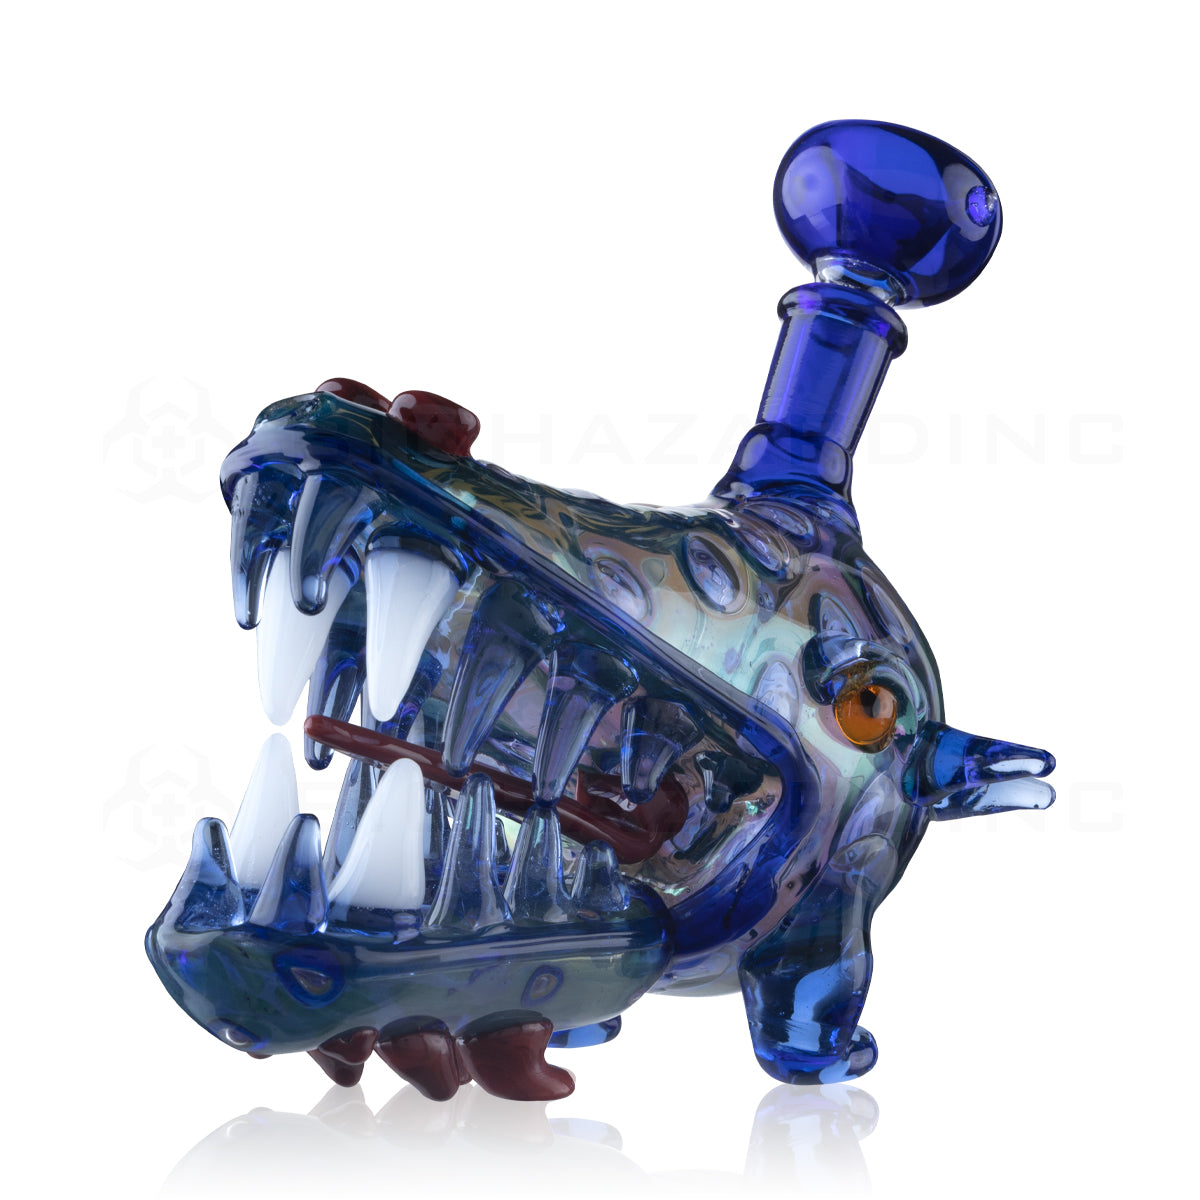 Novelty | Water Dragon Water Pipe | 6" - Glass - Blue Fumed Novelty Hand Pipe Biohazard Inc   